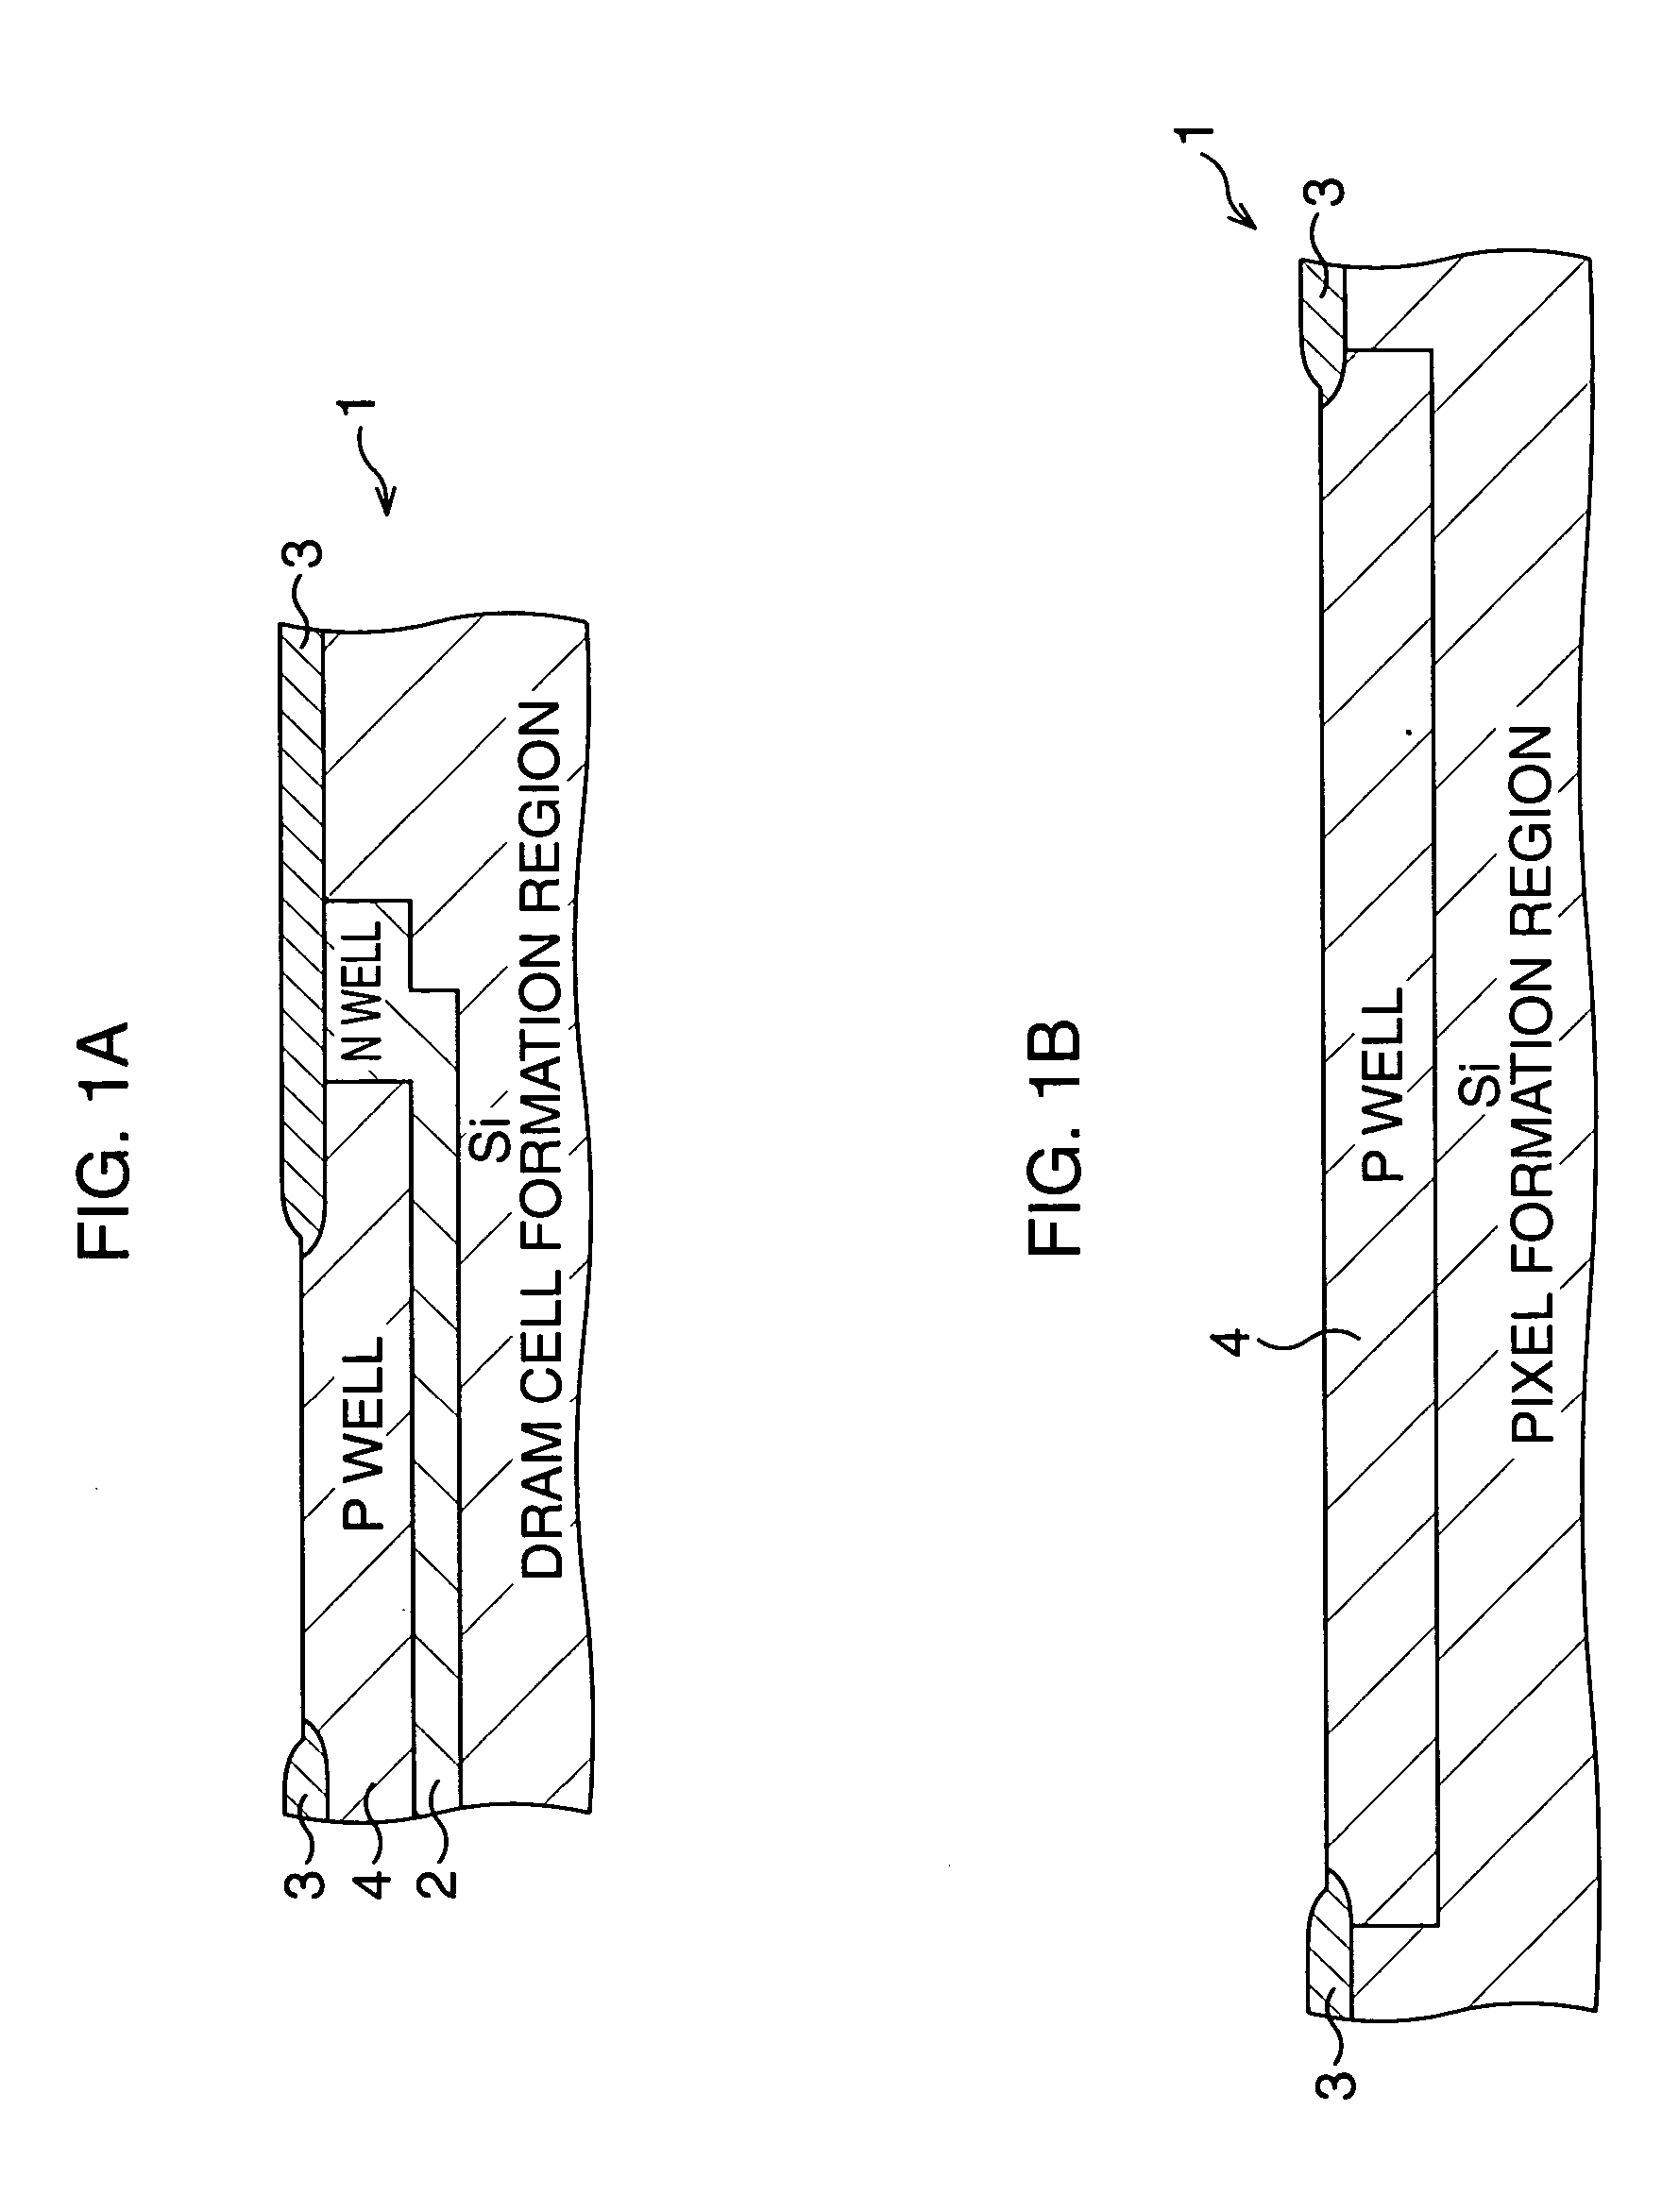 Semiconductor device, manufacturing process thereof and imaging device